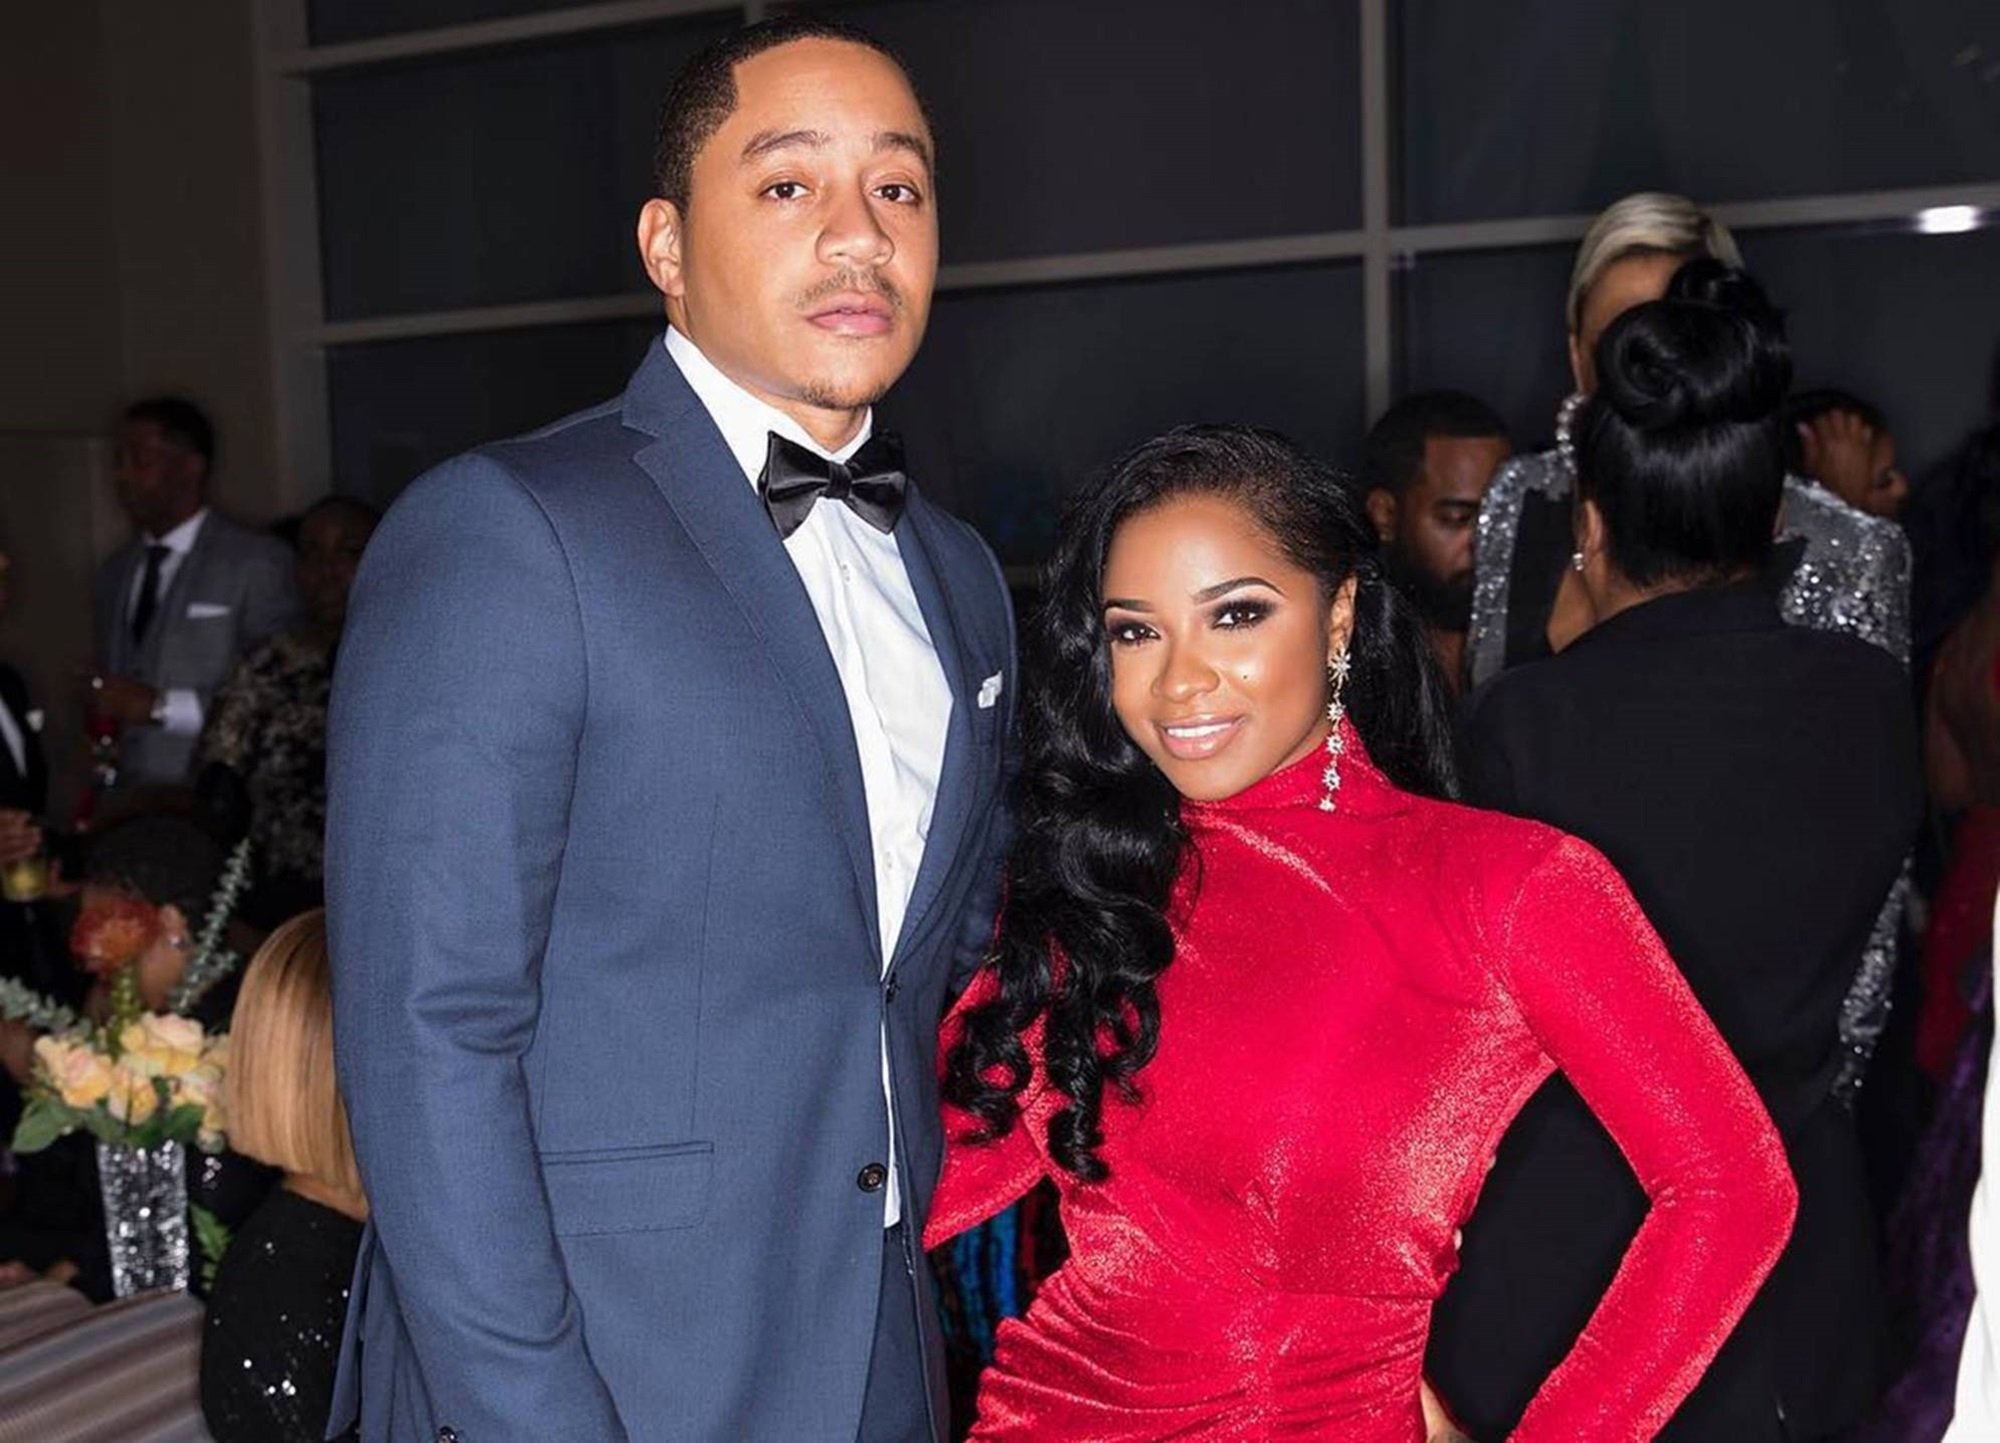 She Said Yes: Toya Wright Is Officially Engaged To Boyfriend Robert “Red” Rushing